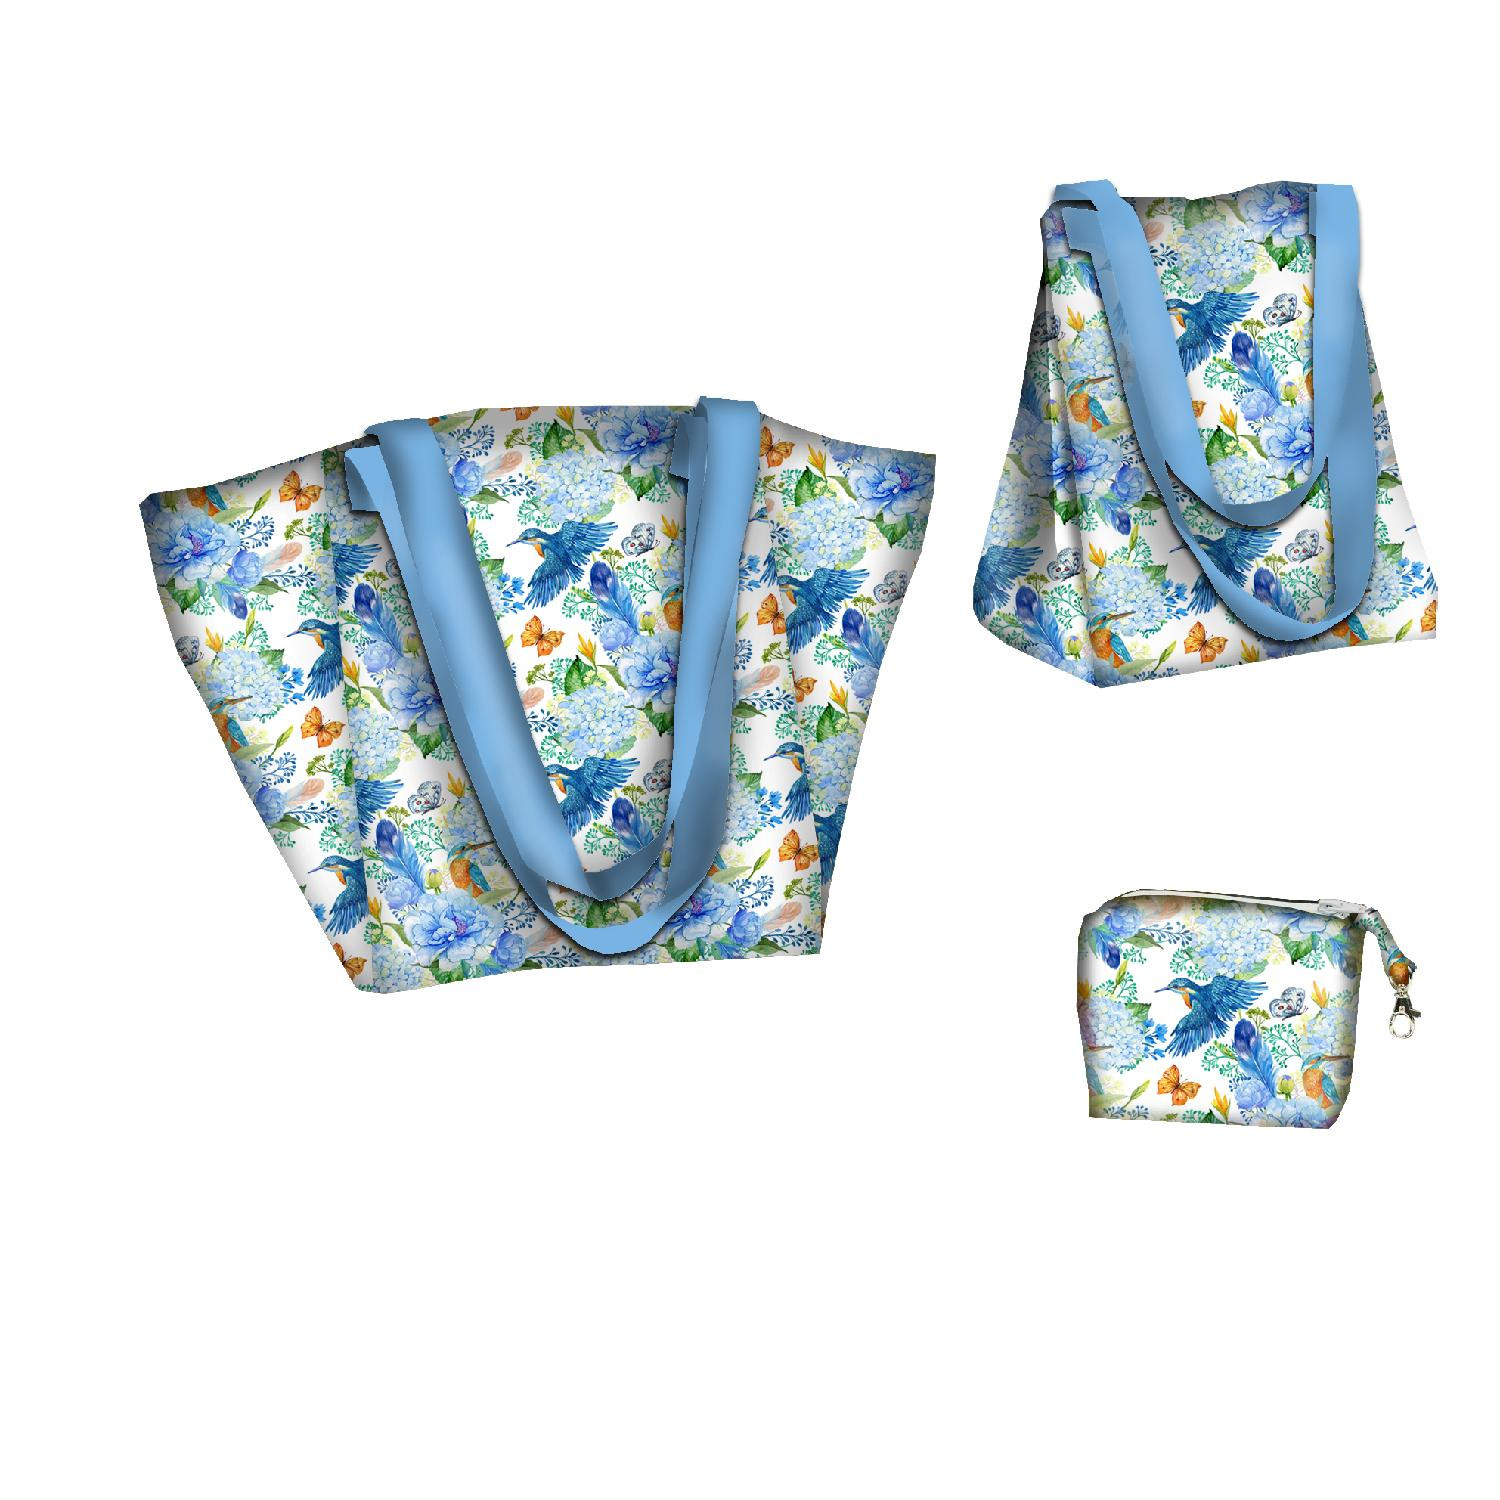 XL bag with in-bag pouch 2 in 1 - KINGFISHERS AND LILACS (KINGFISHERS IN THE MEADOW) / white - sewing set